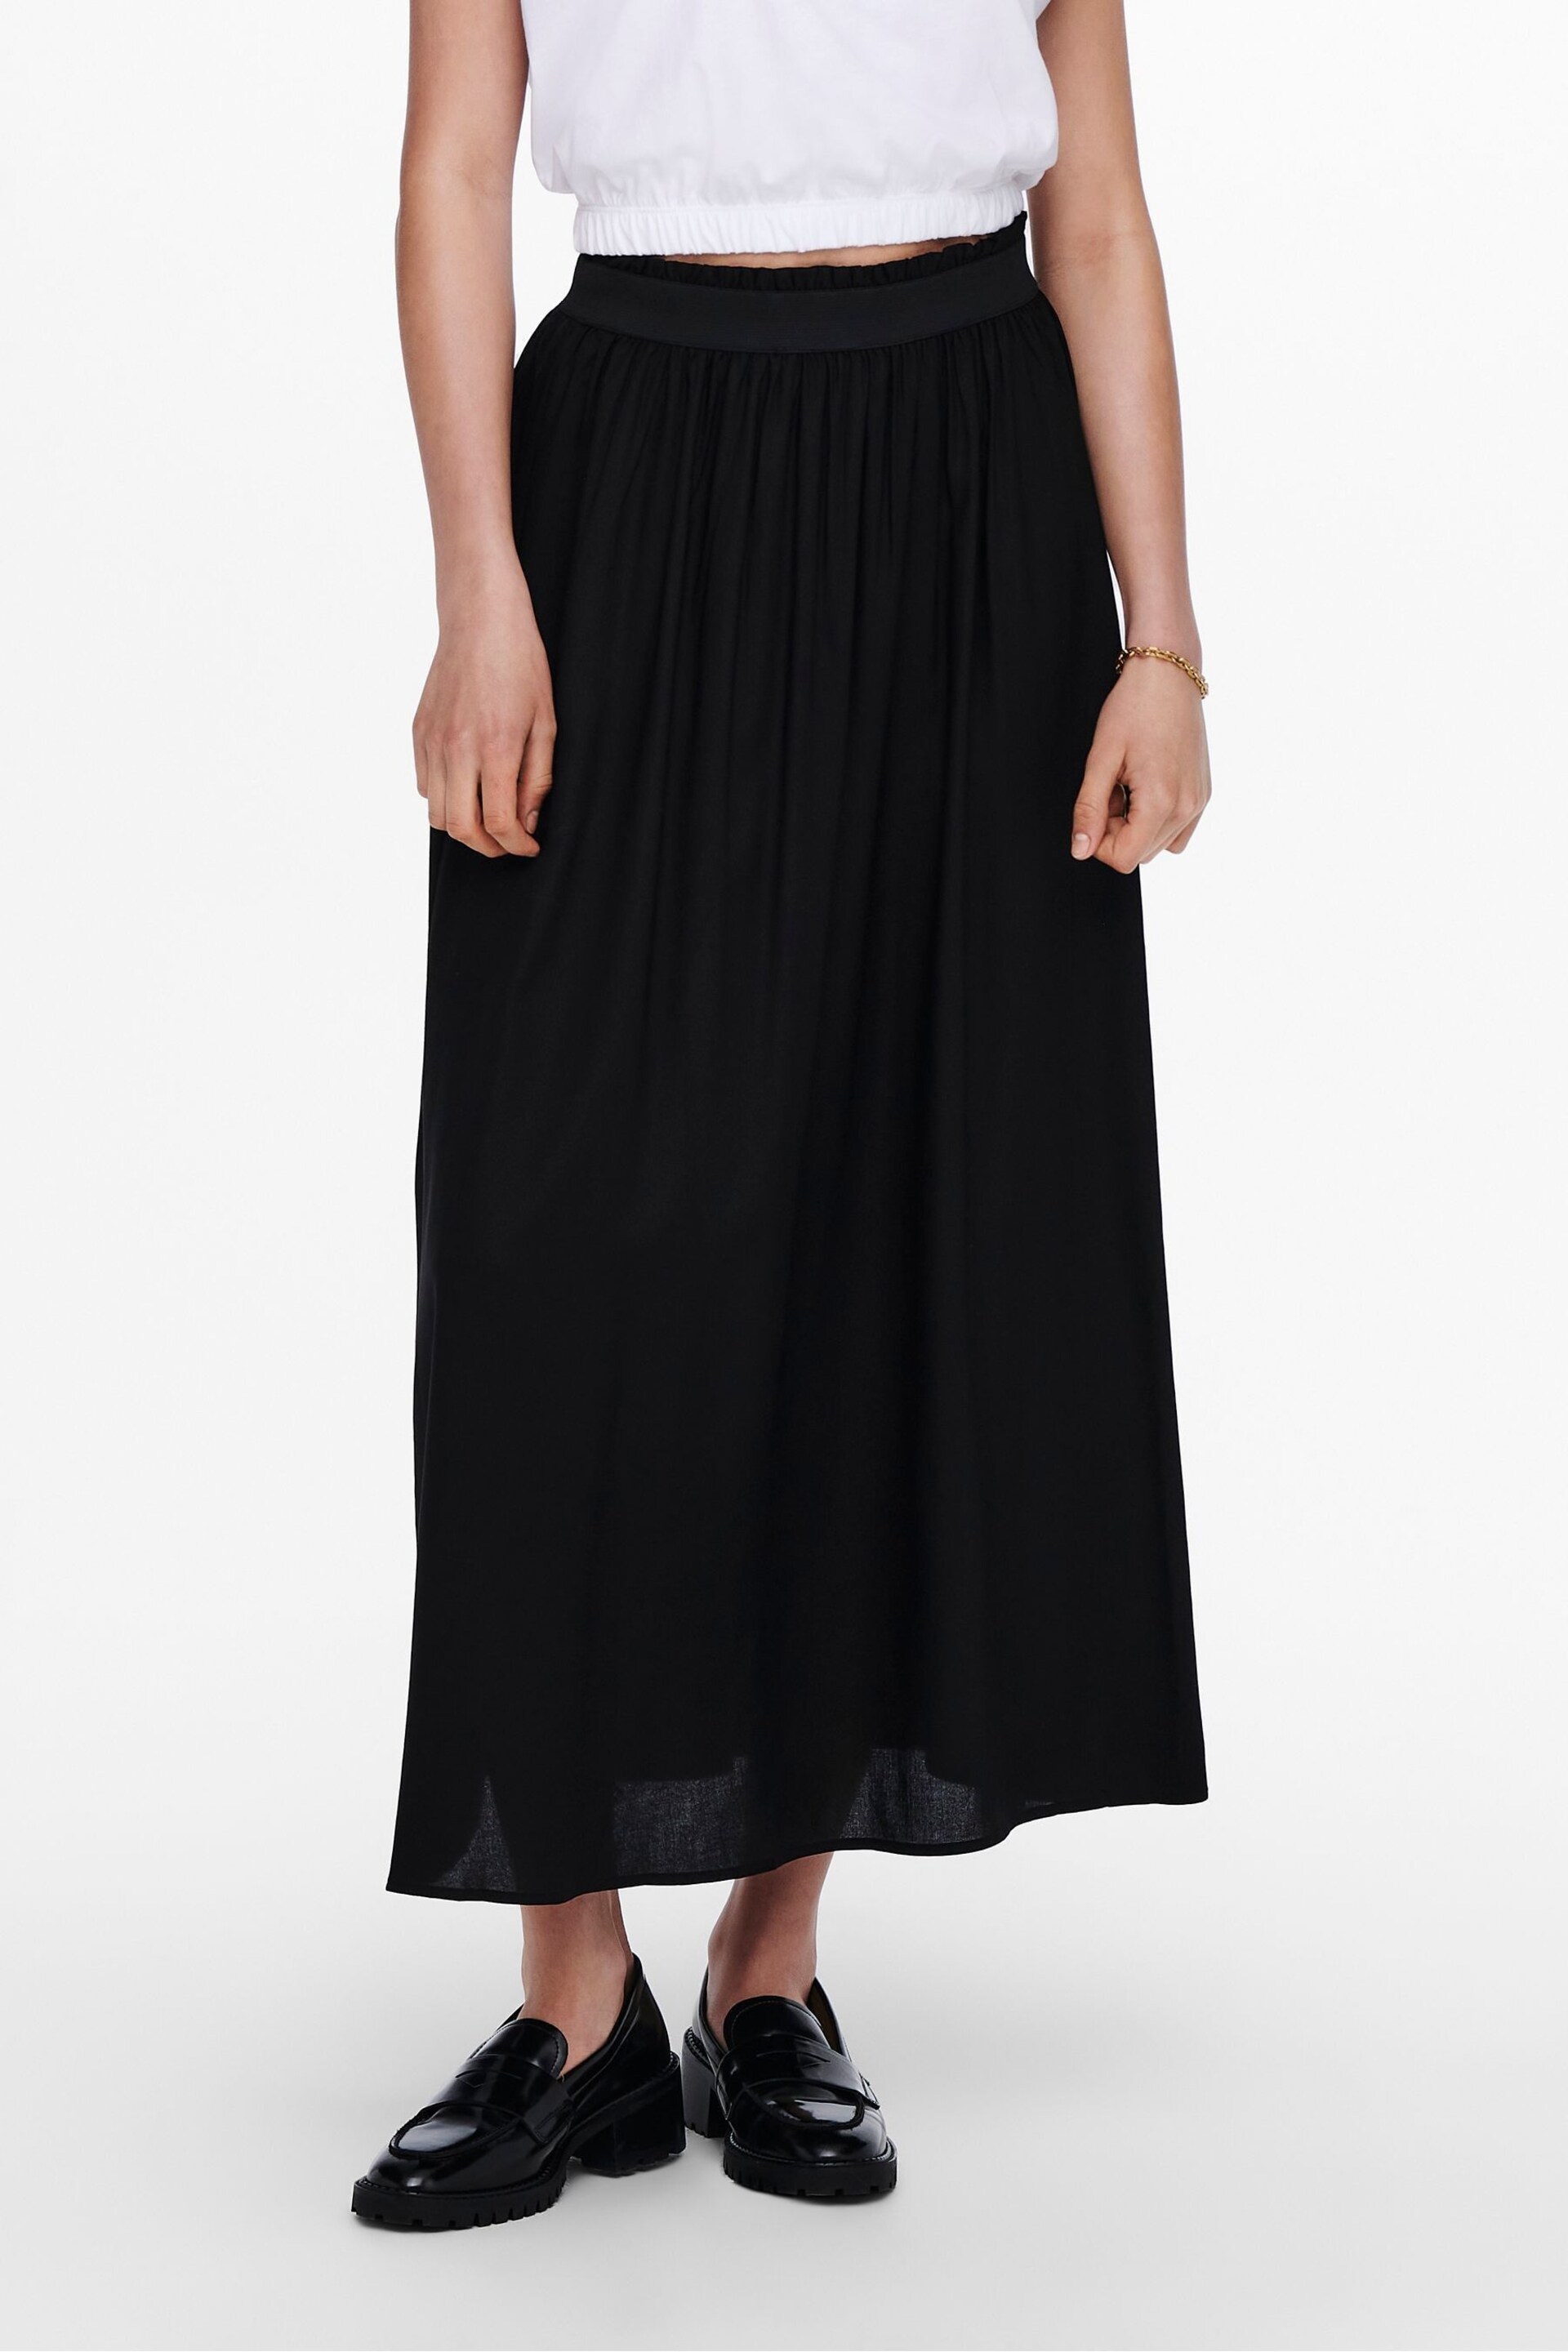 ONLY Black Jersey Midi Skirt - Image 4 of 7